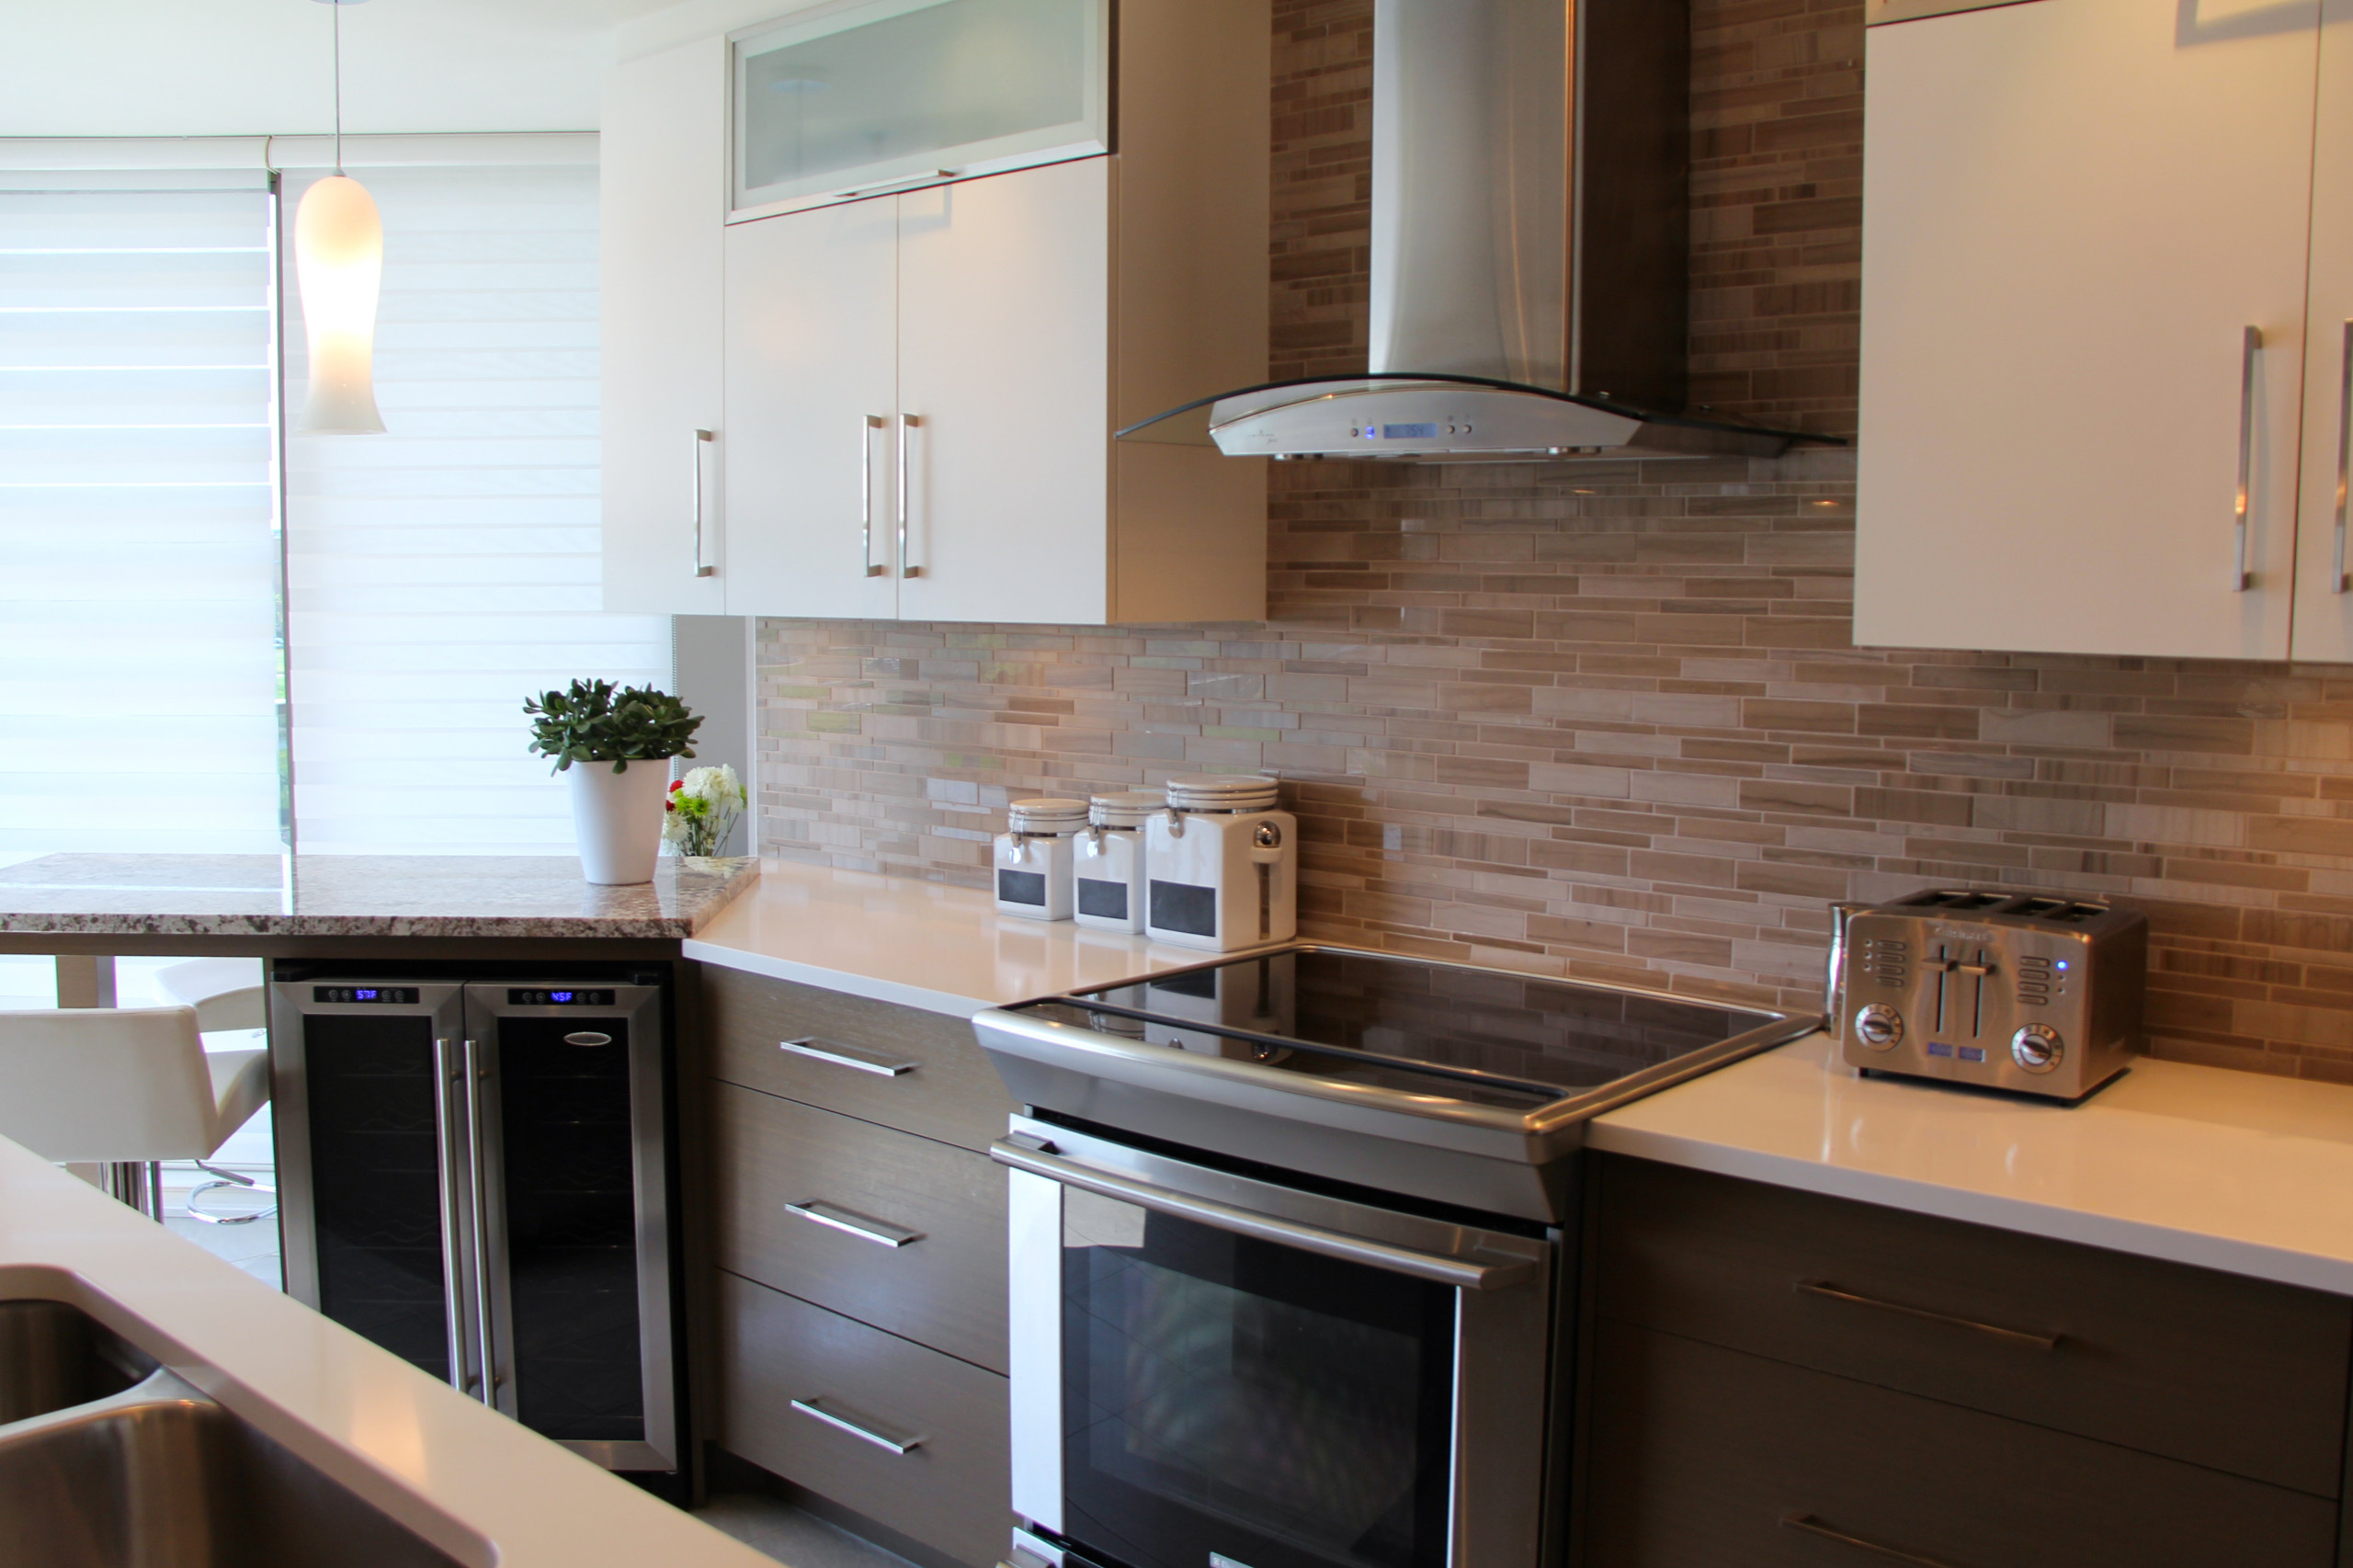 Boucherville Condo - Stylizing and Re-decorating